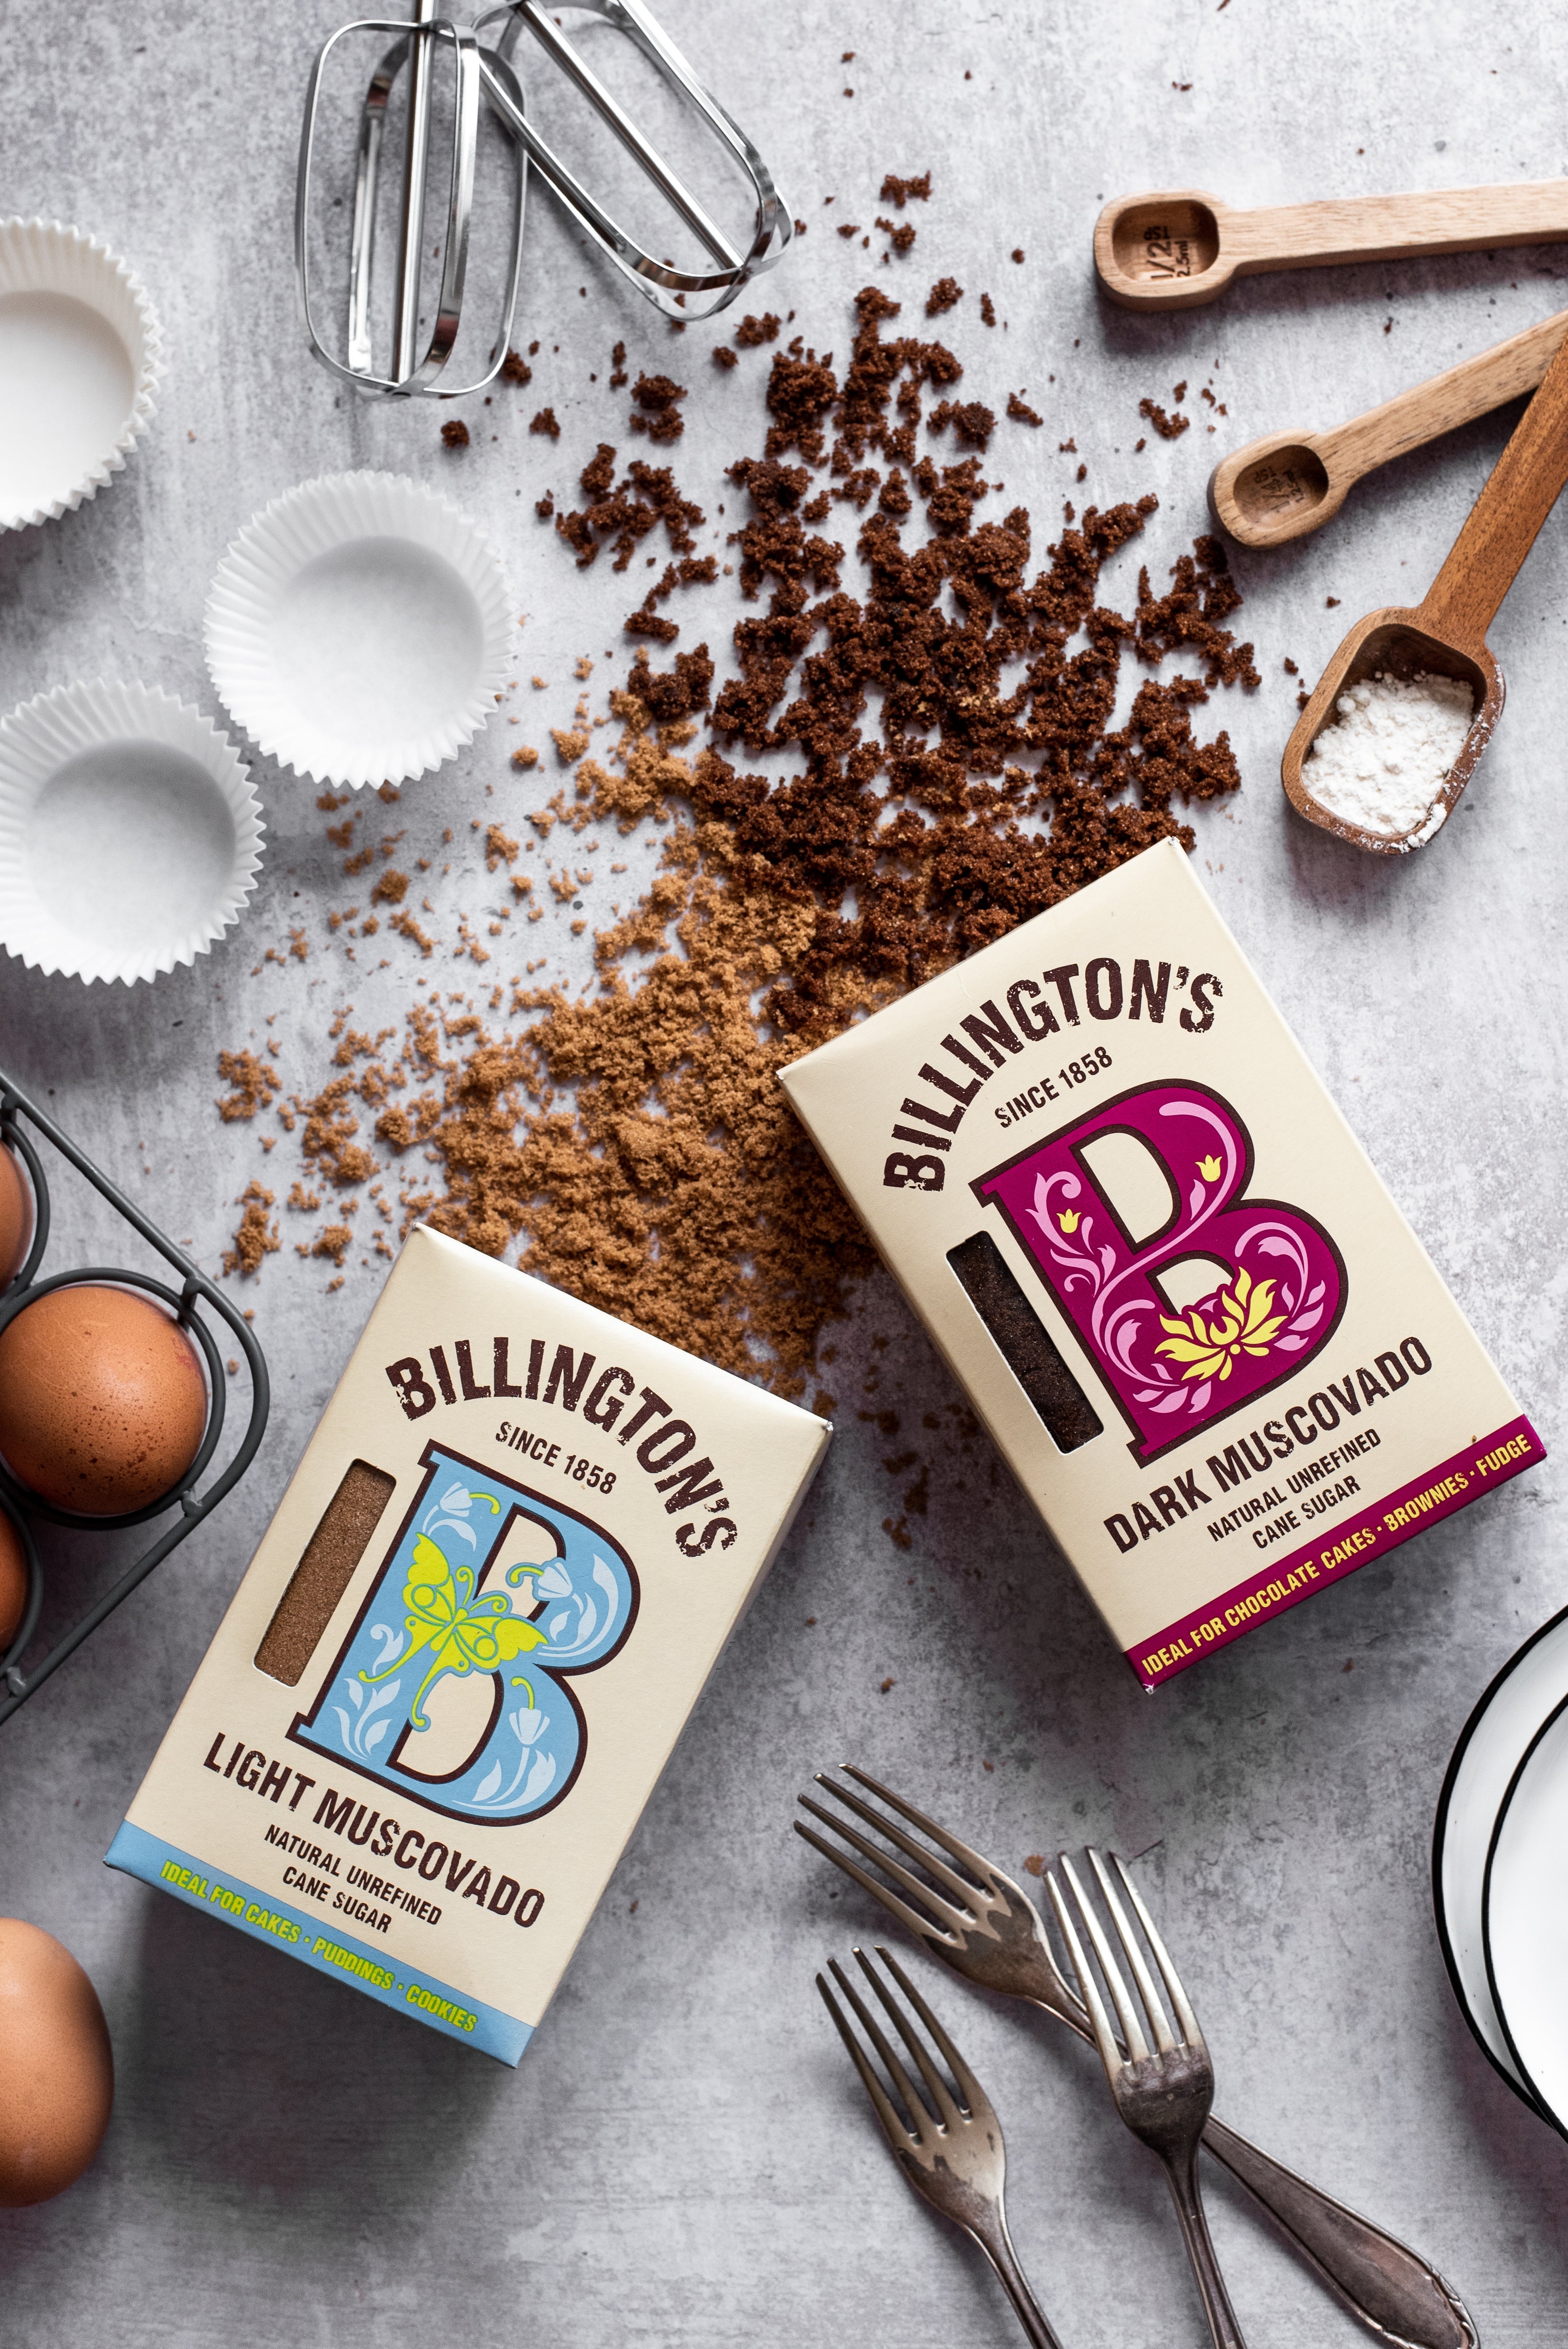 What does Billington's bring to my bake?